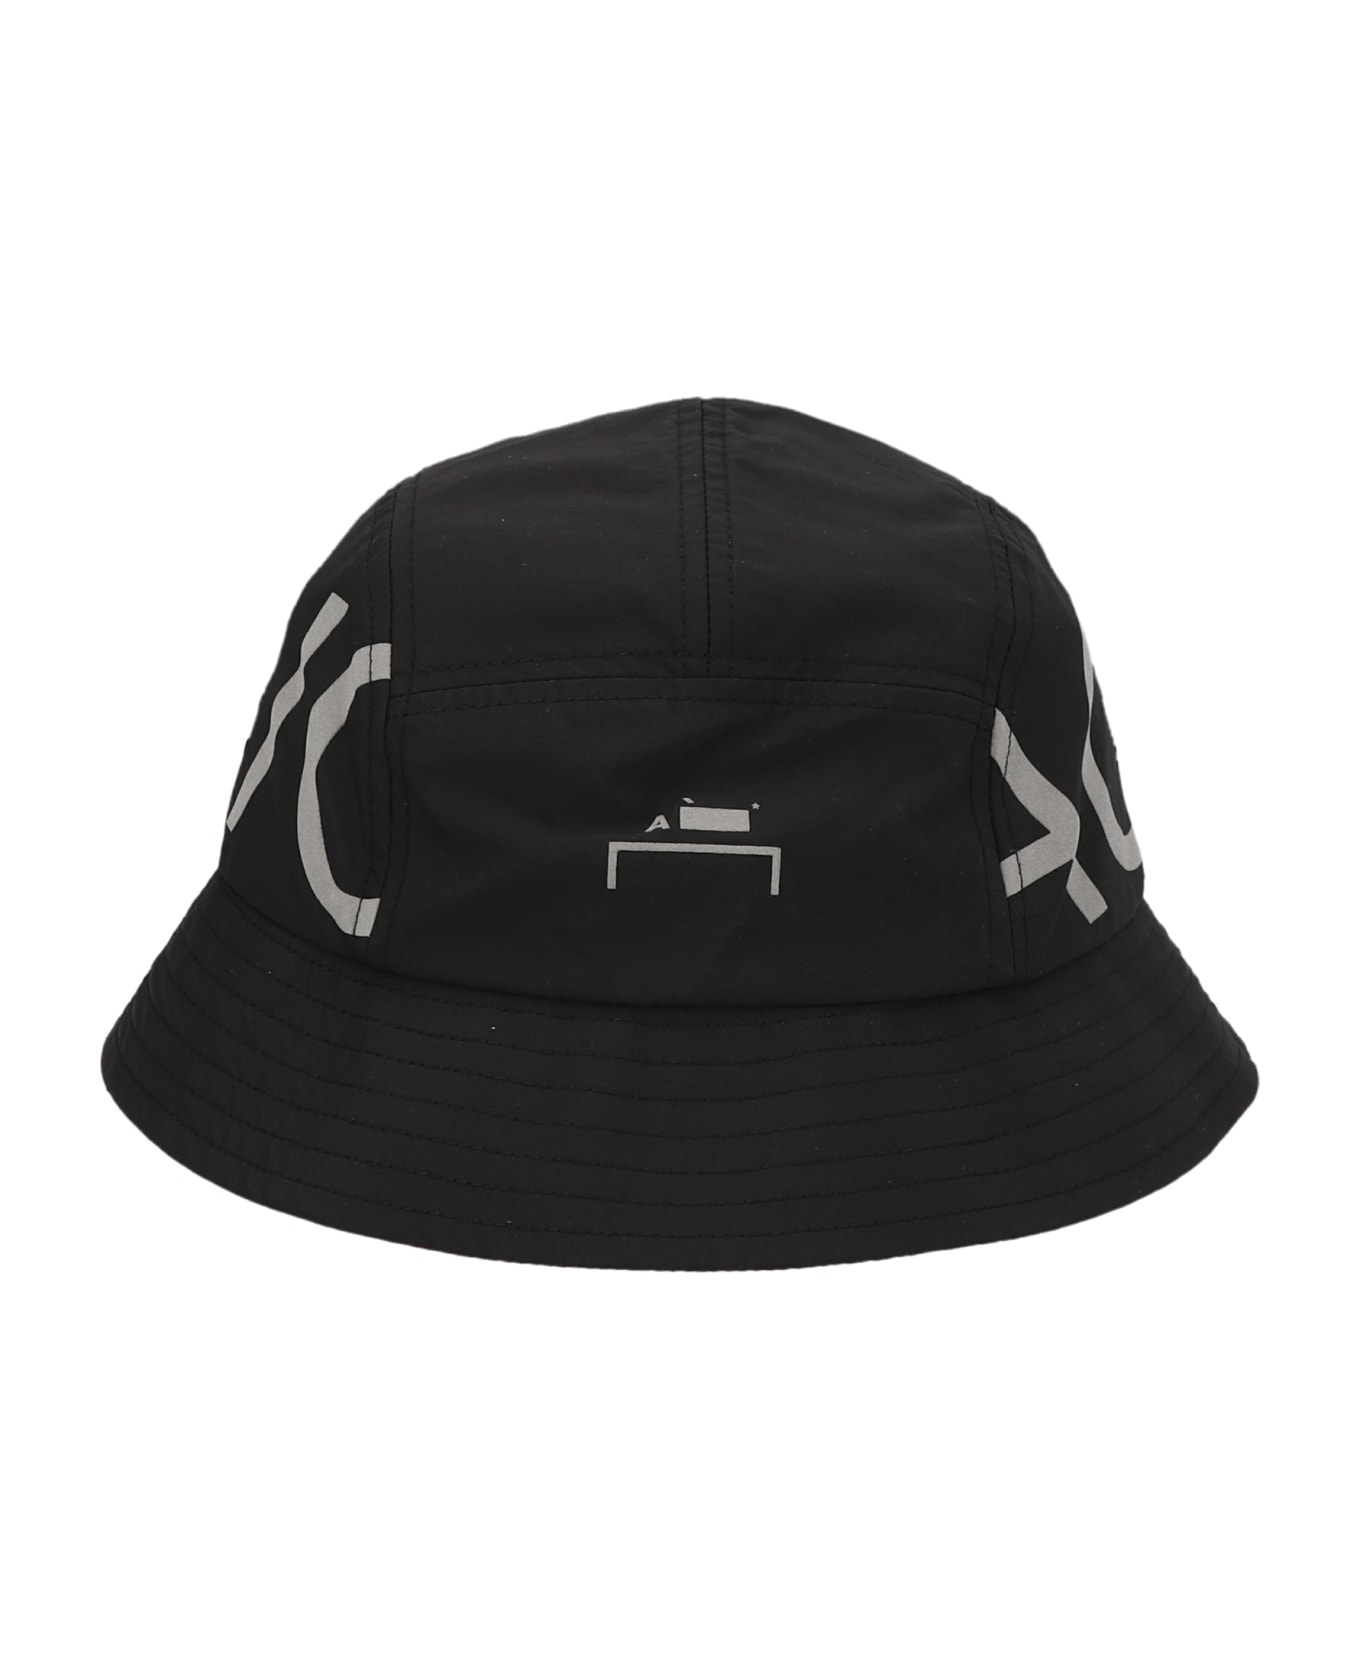 A-COLD-WALL 'cipher' Bucket Hat - Black  